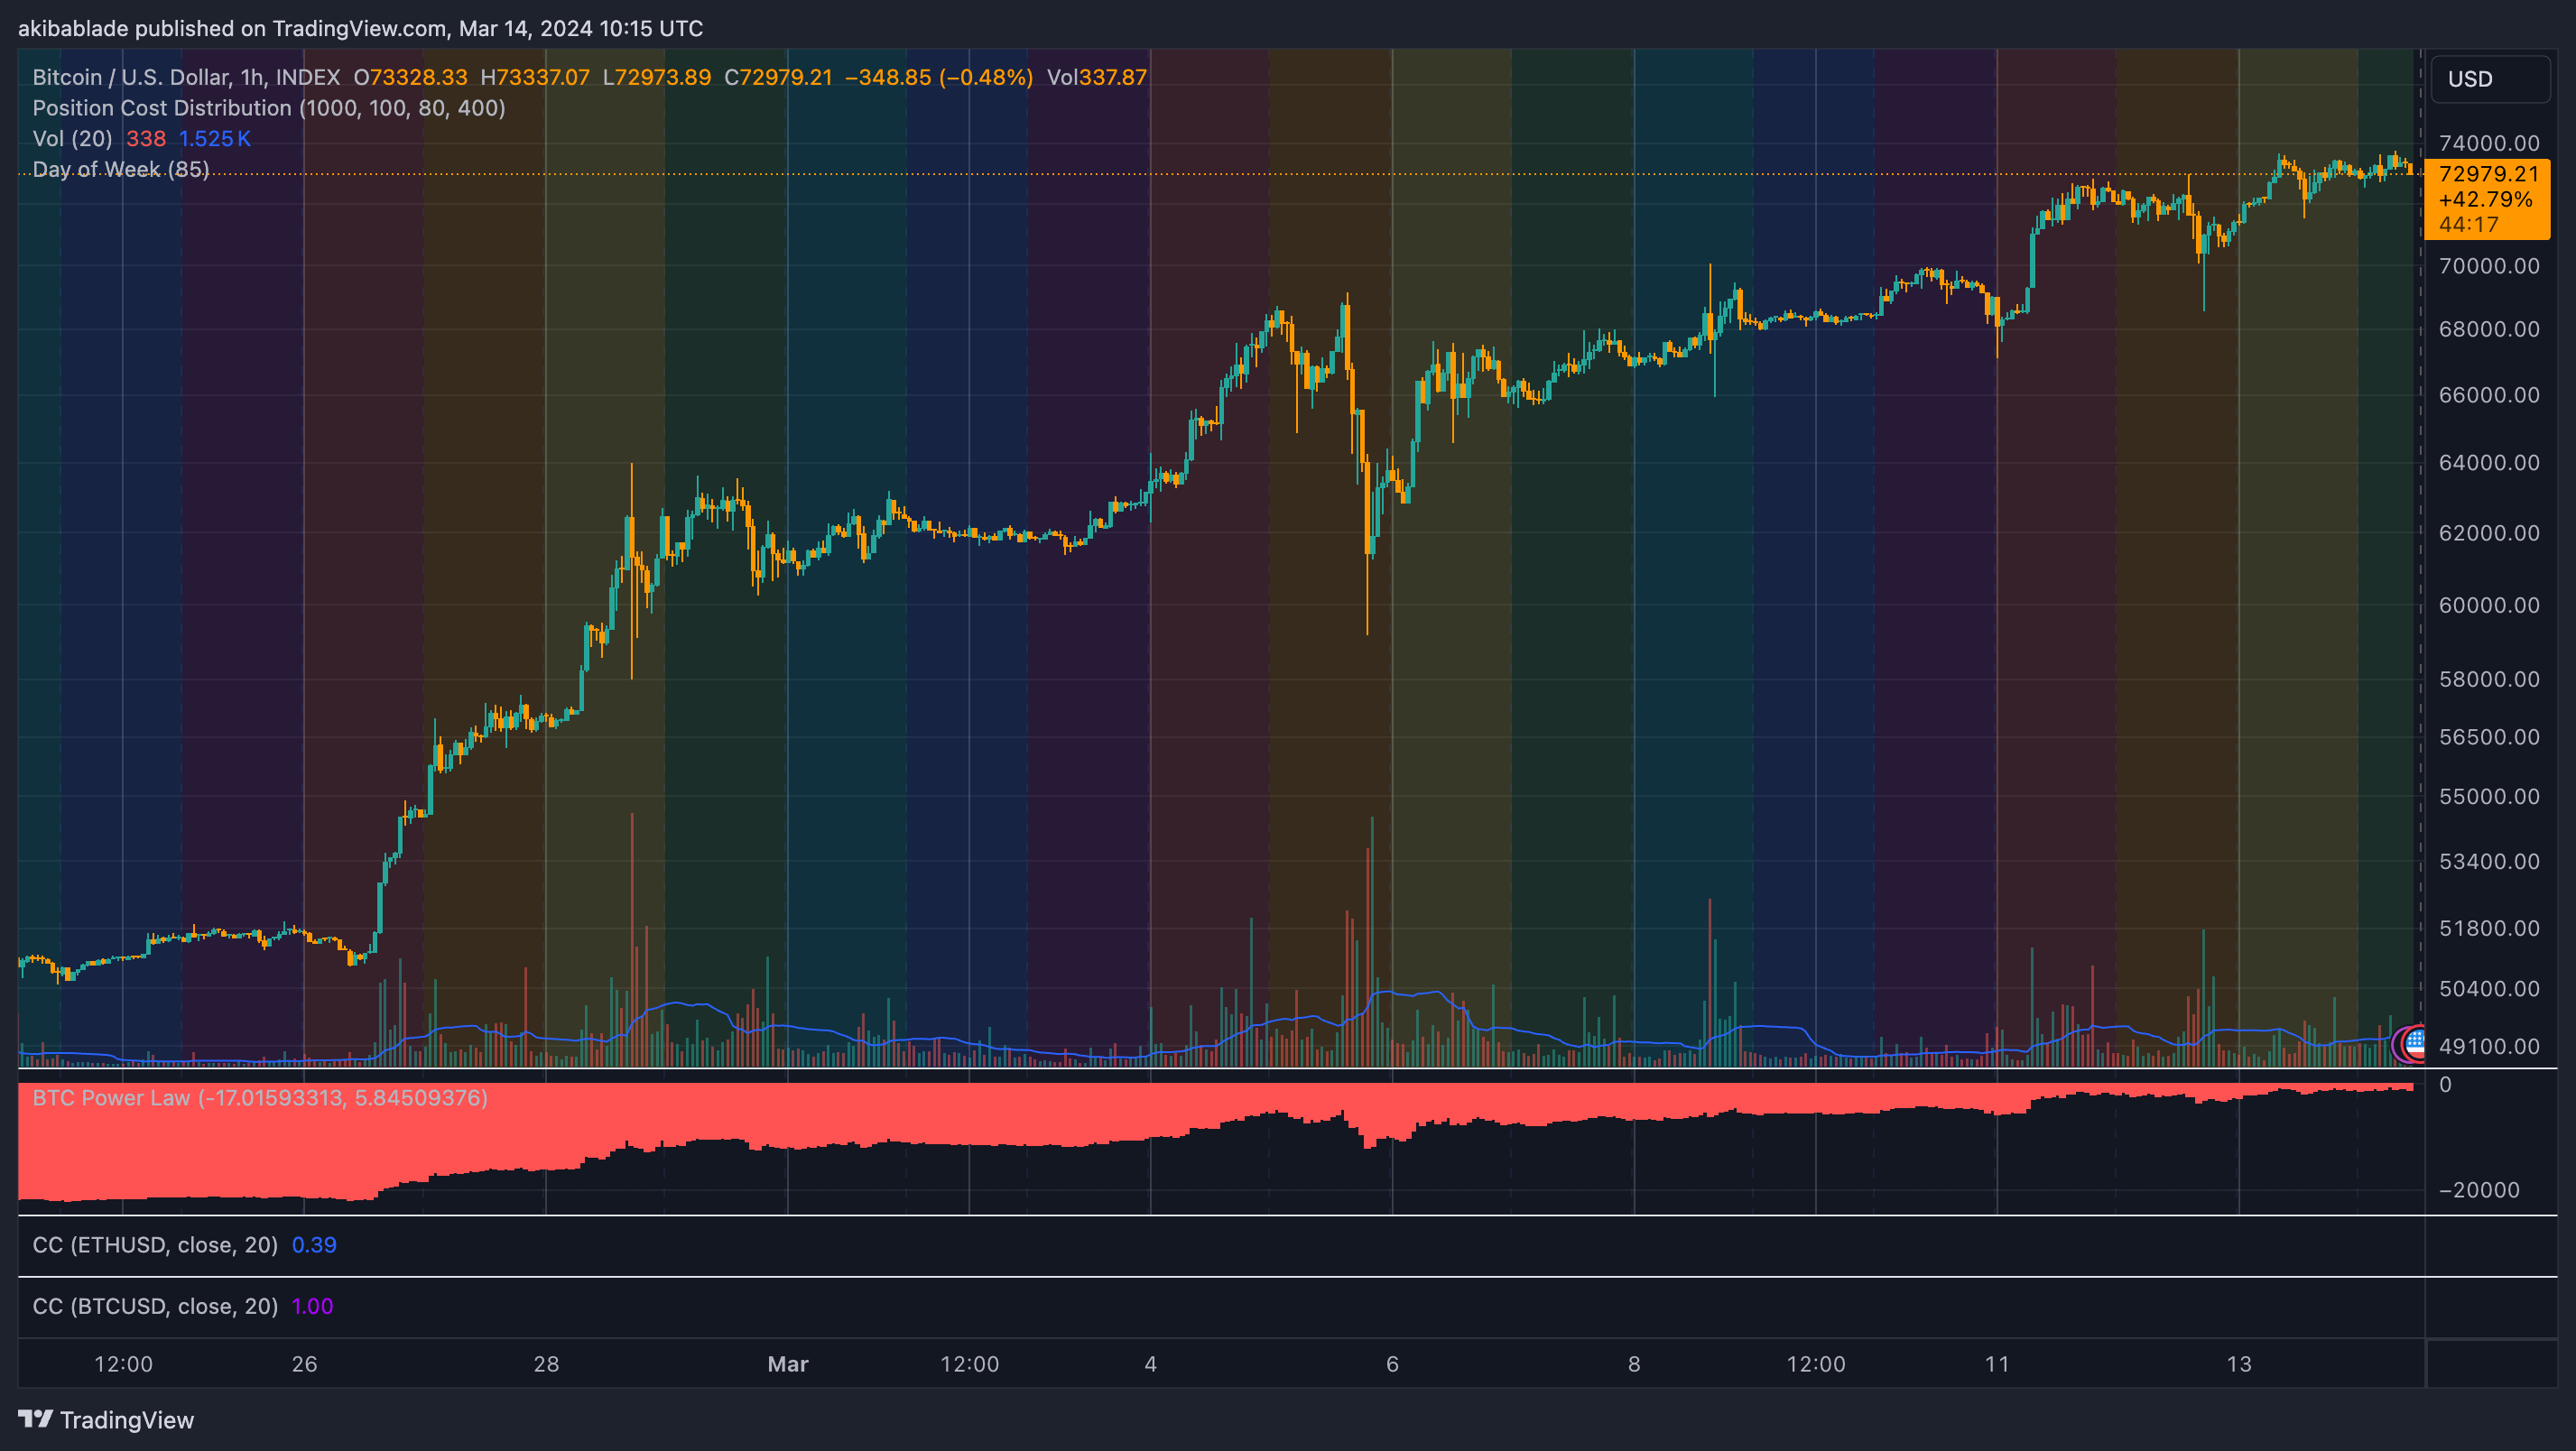 Bitcoin days of the week (Source: TradingView)